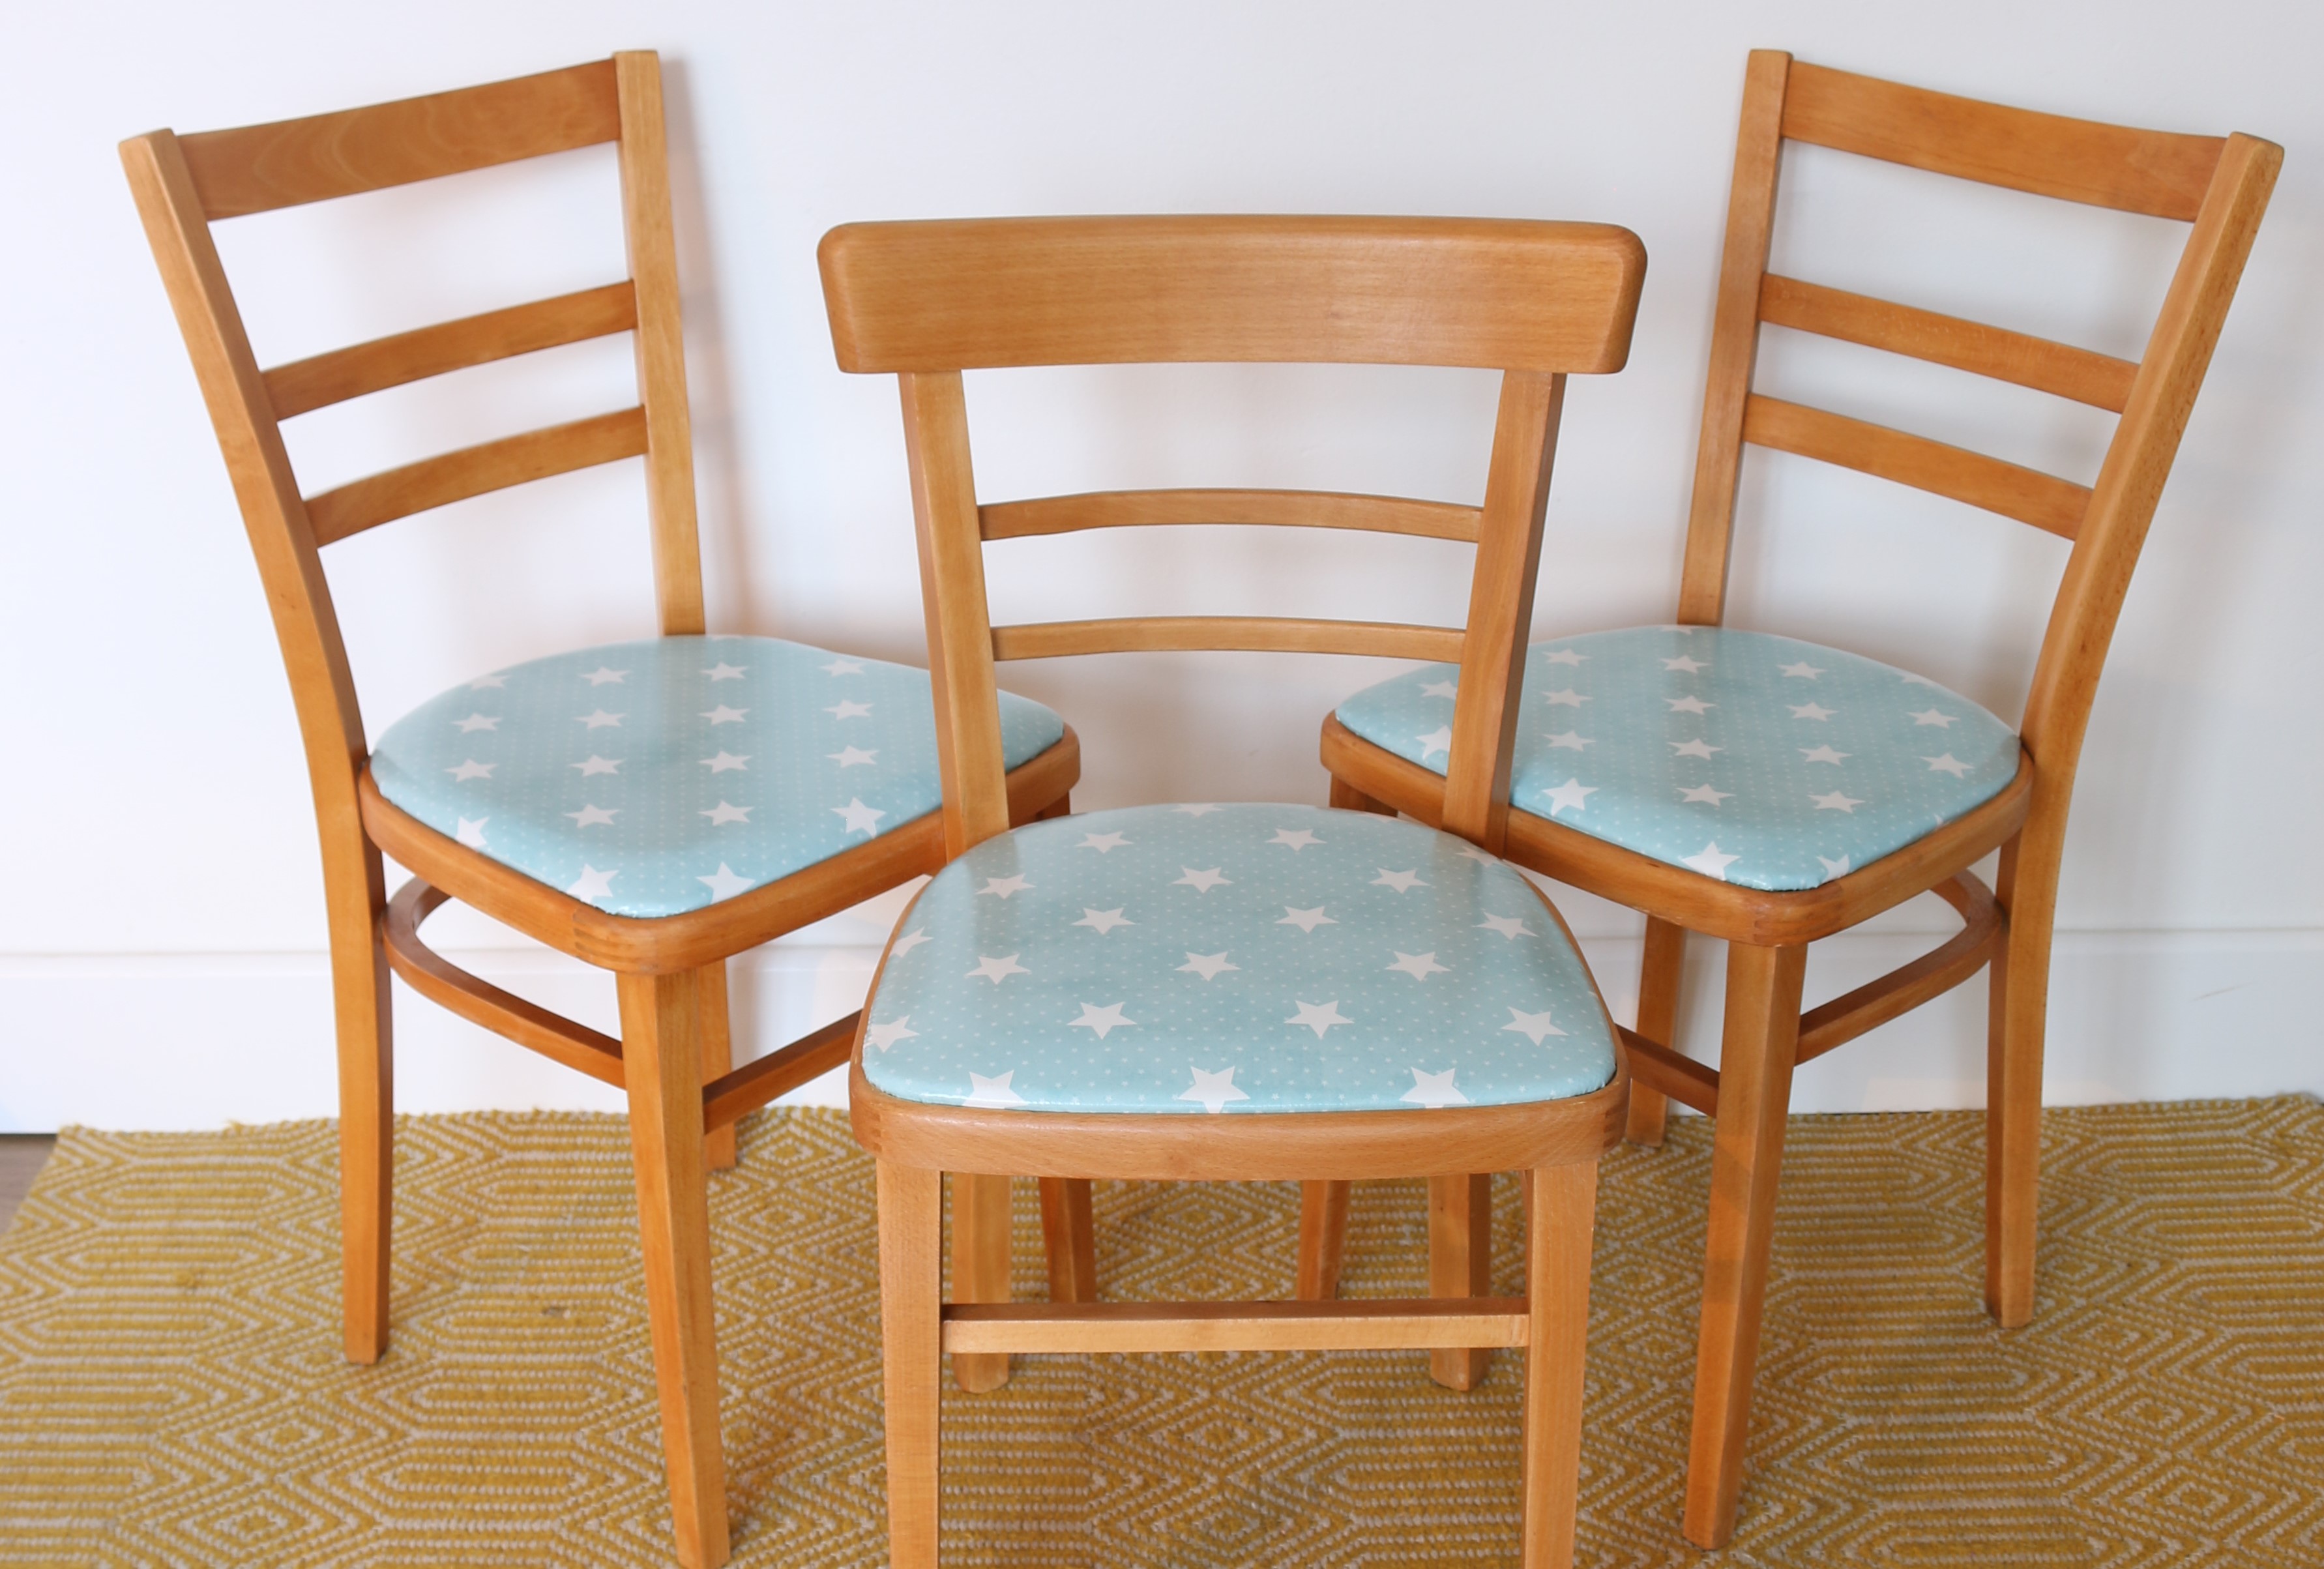 Step-by-step video to restore vintage kitchen chairs